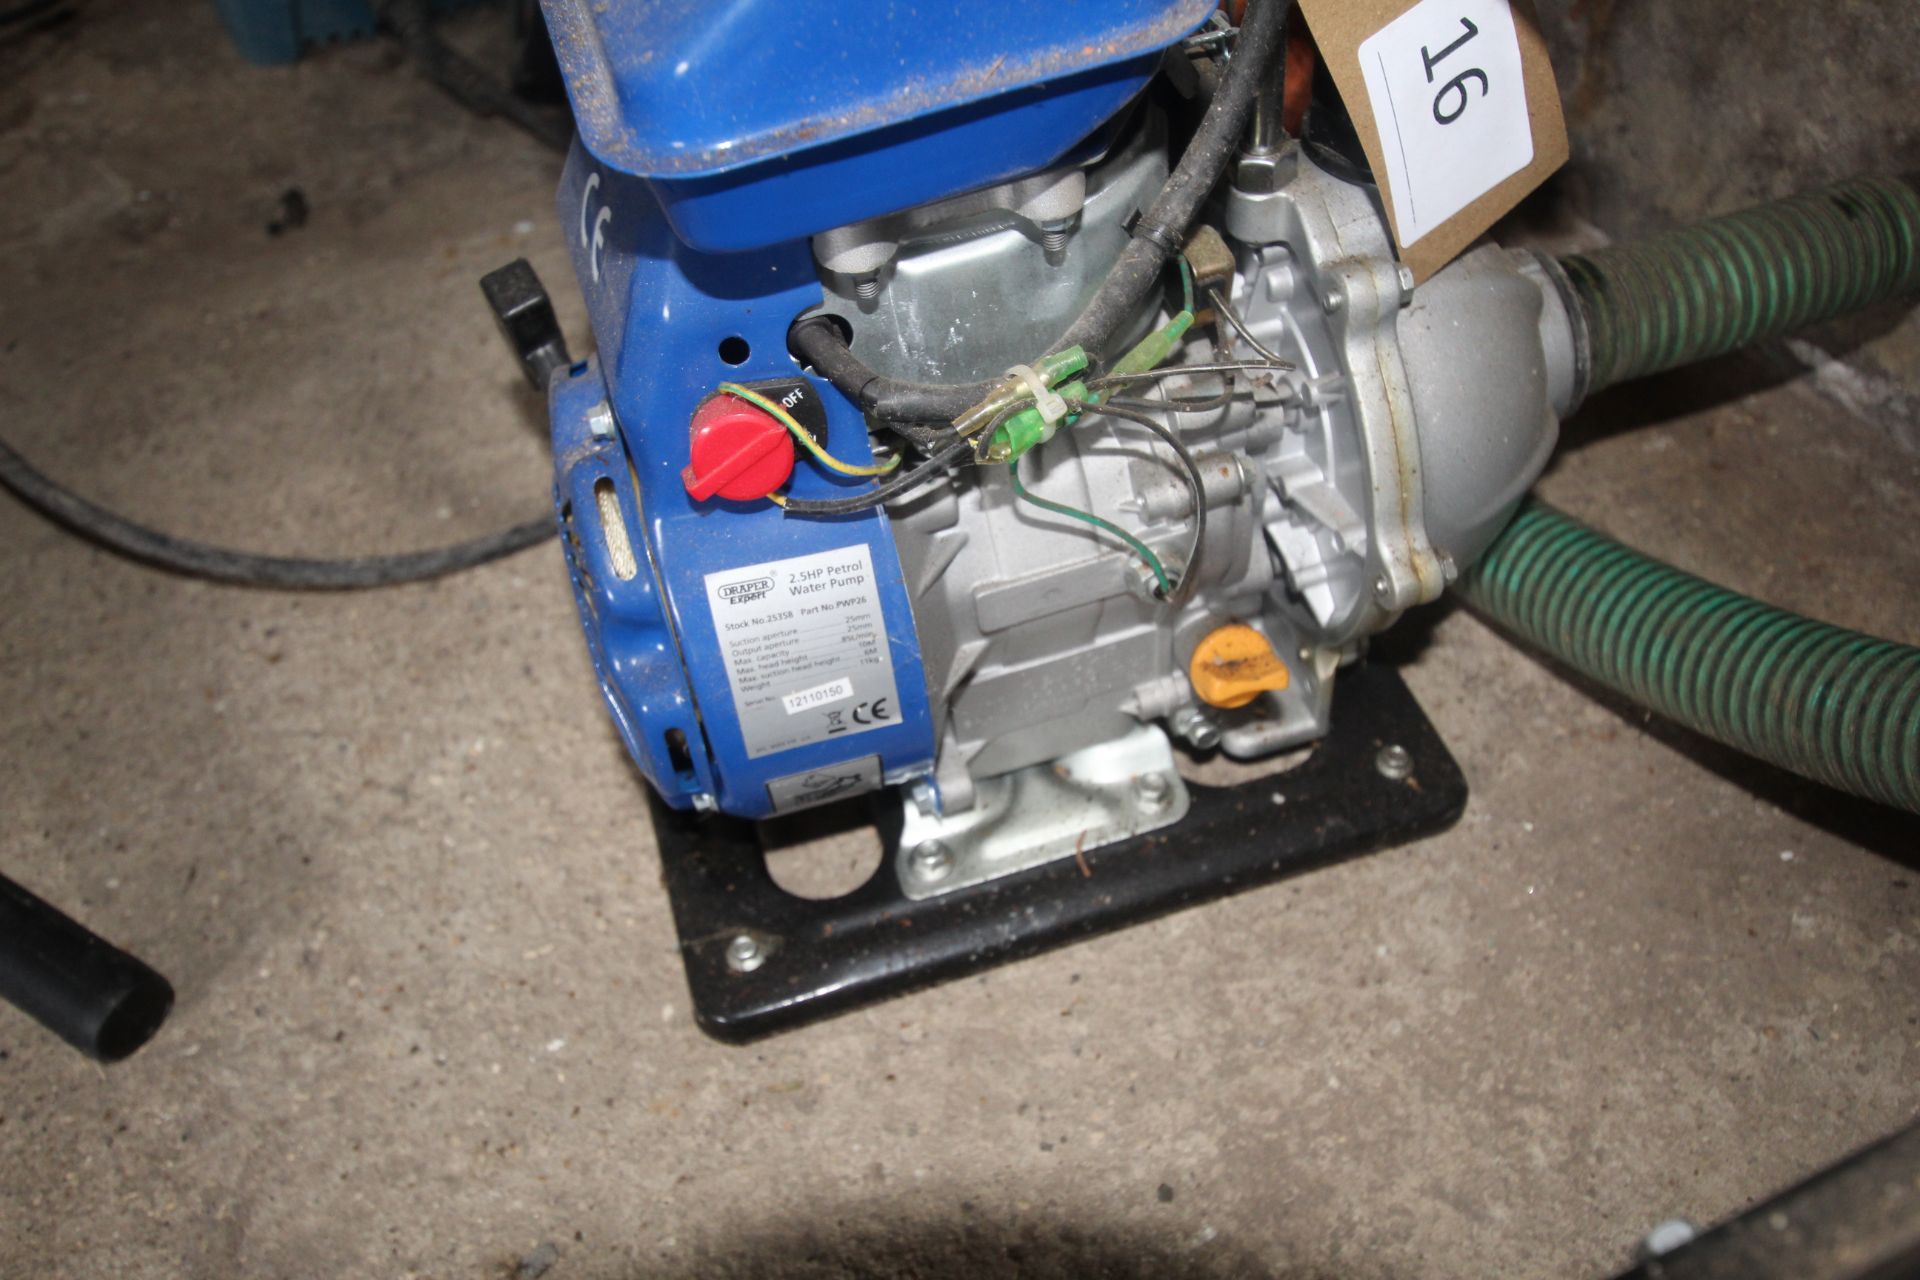 Draper Expert petrol driven water pump with suction hose. - Image 3 of 4